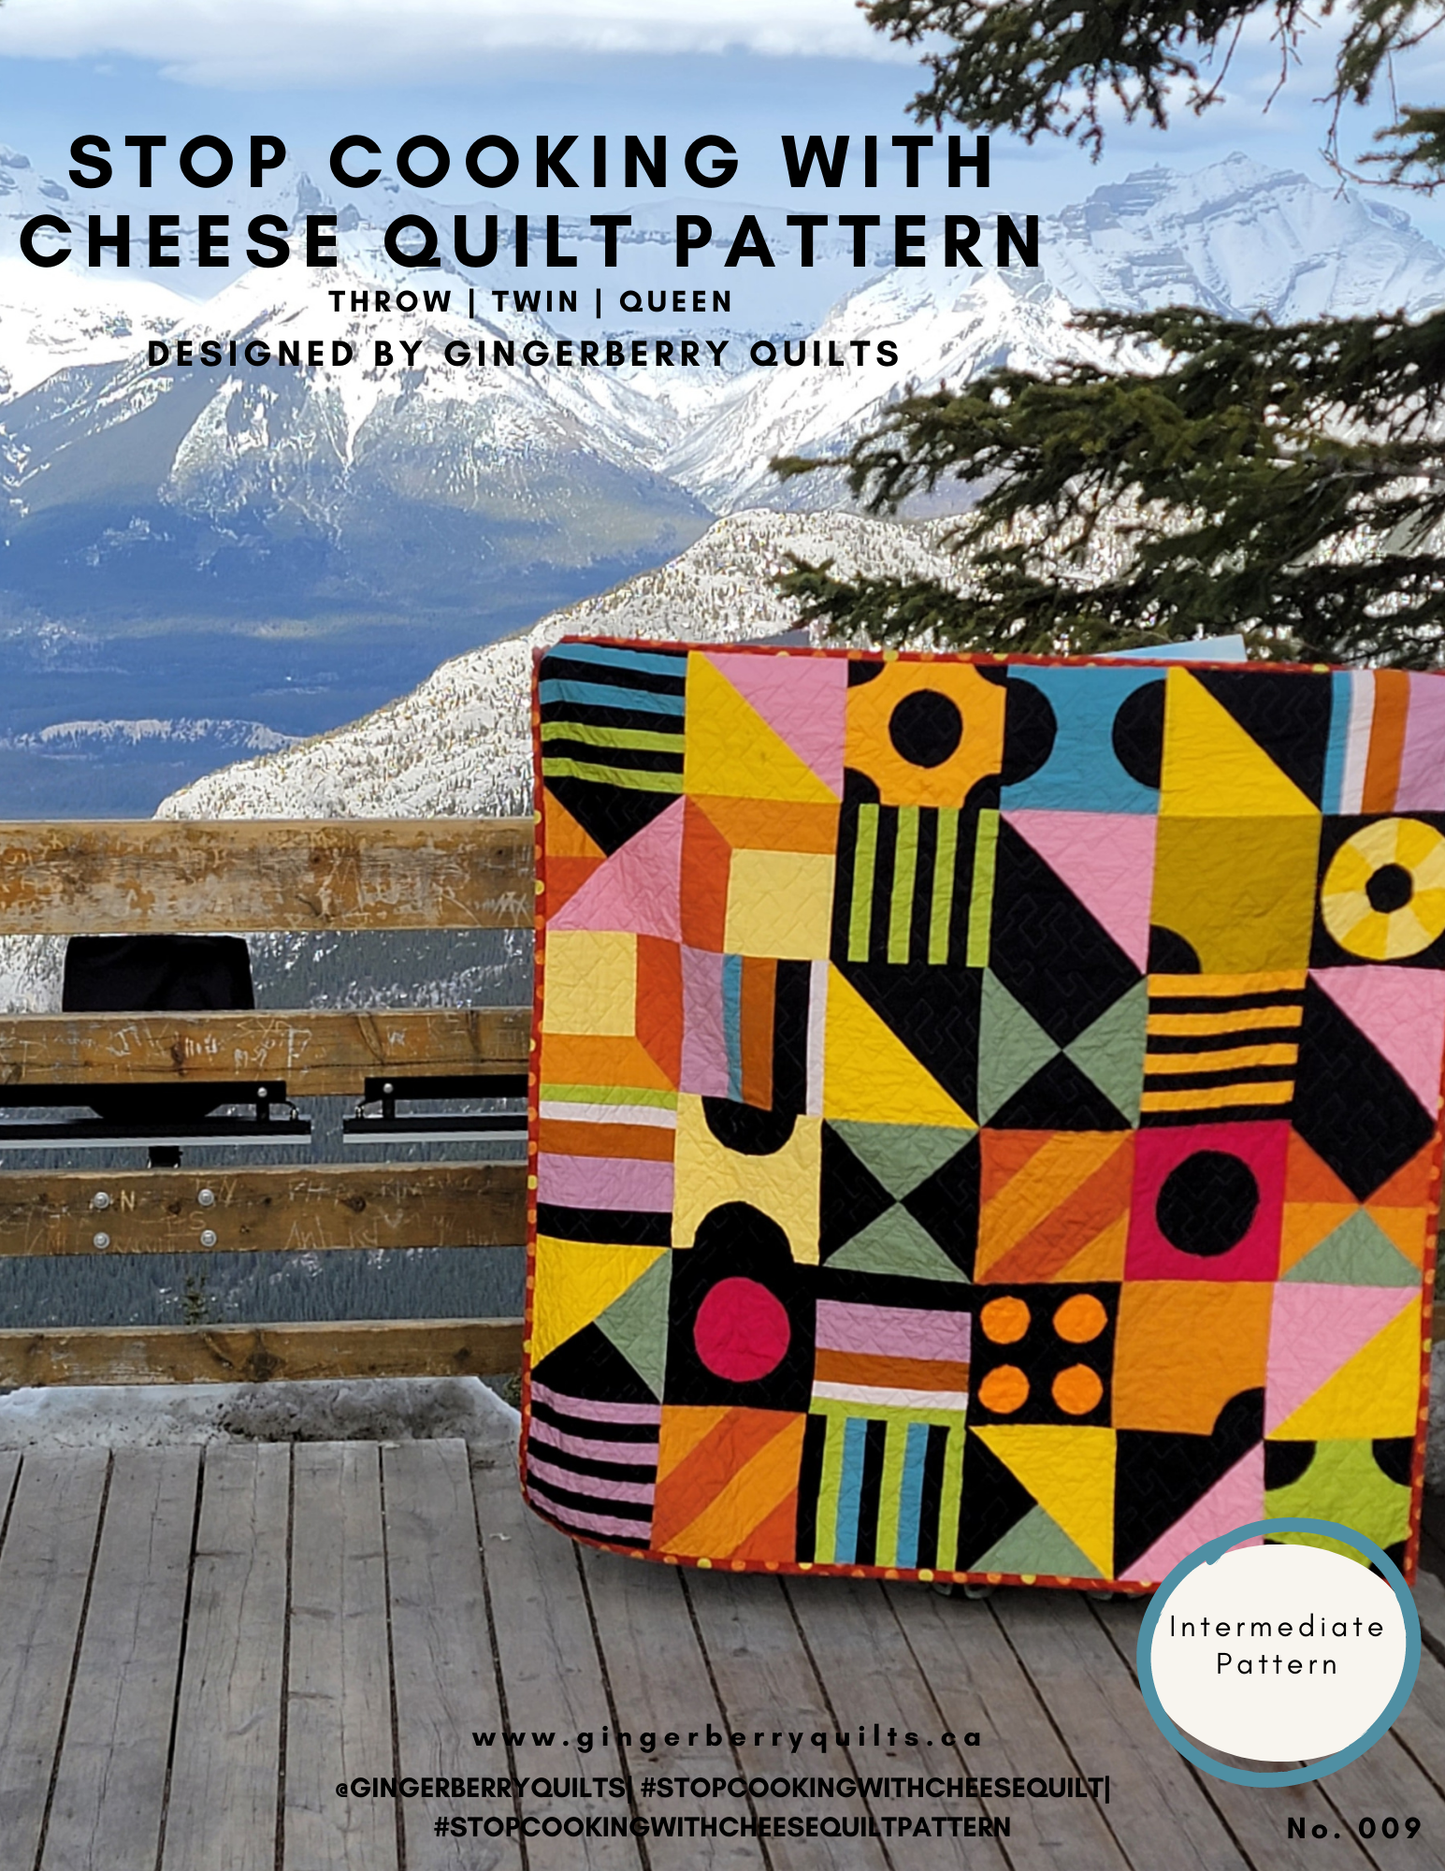 Stop Cooking with Cheese Quilt Pattern - Wholesale bundle of 5 Physical Booklets